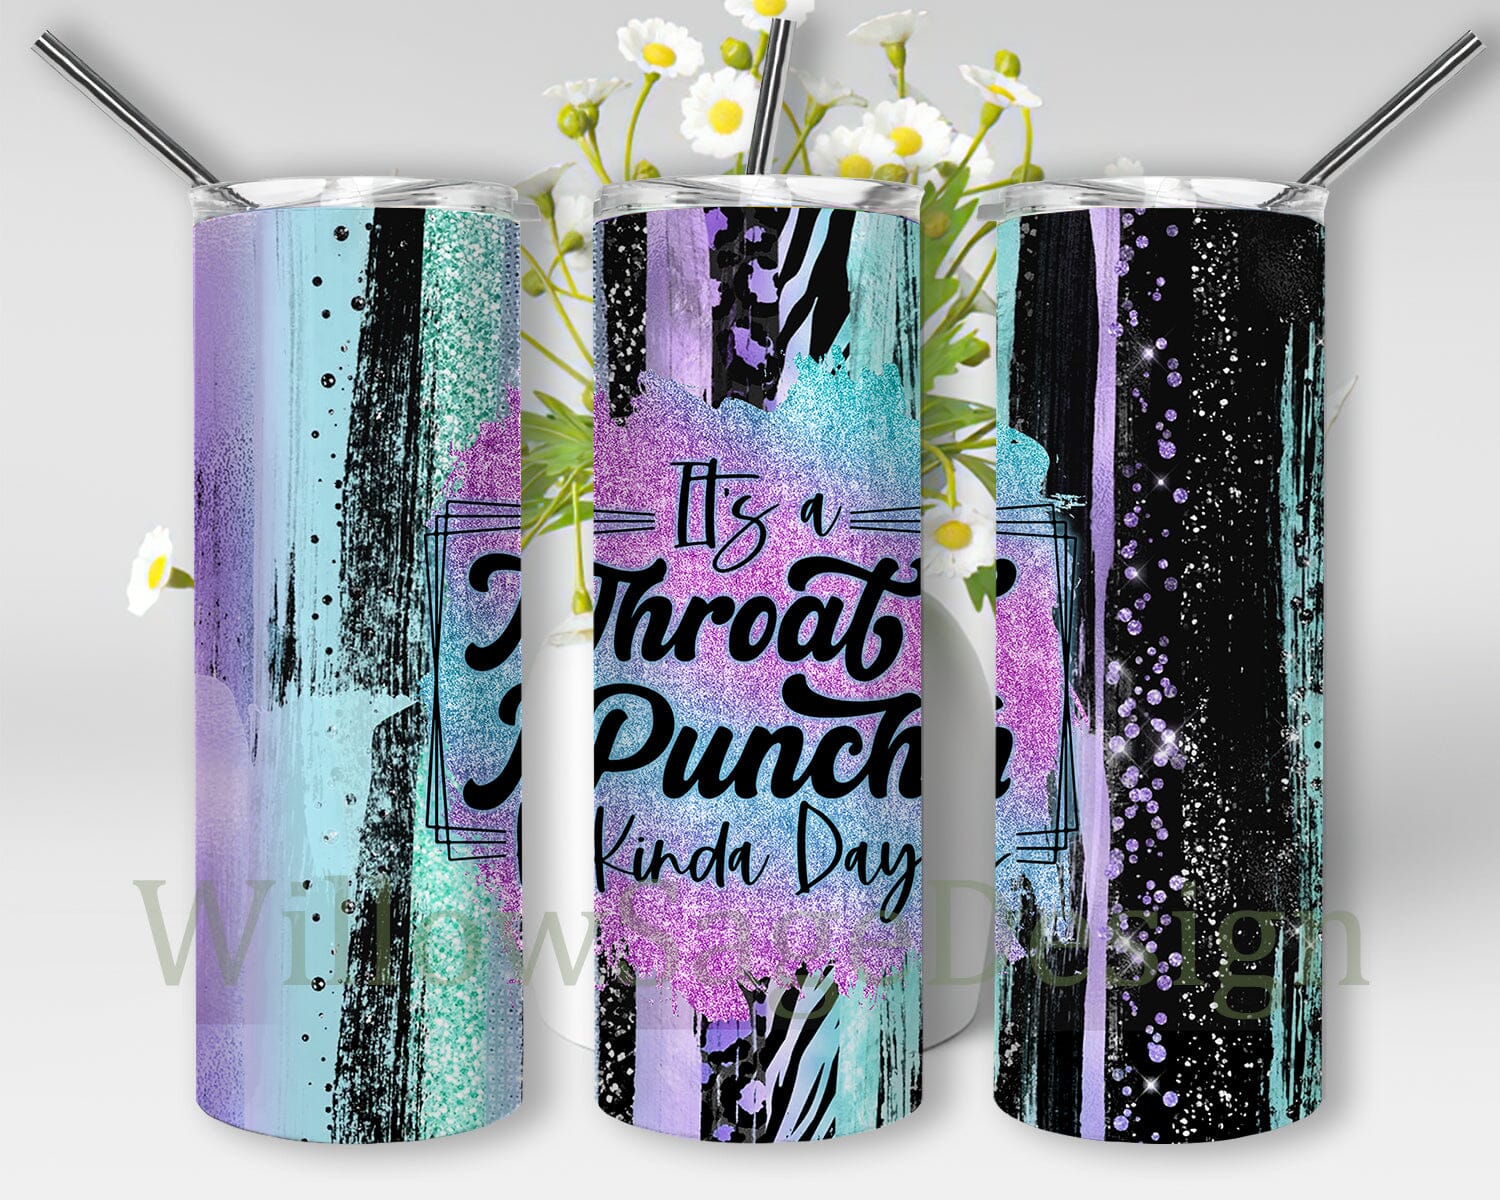 Classy With A Savage Side-hot Cold Tumbler-sassy Hot Cold Tumbler